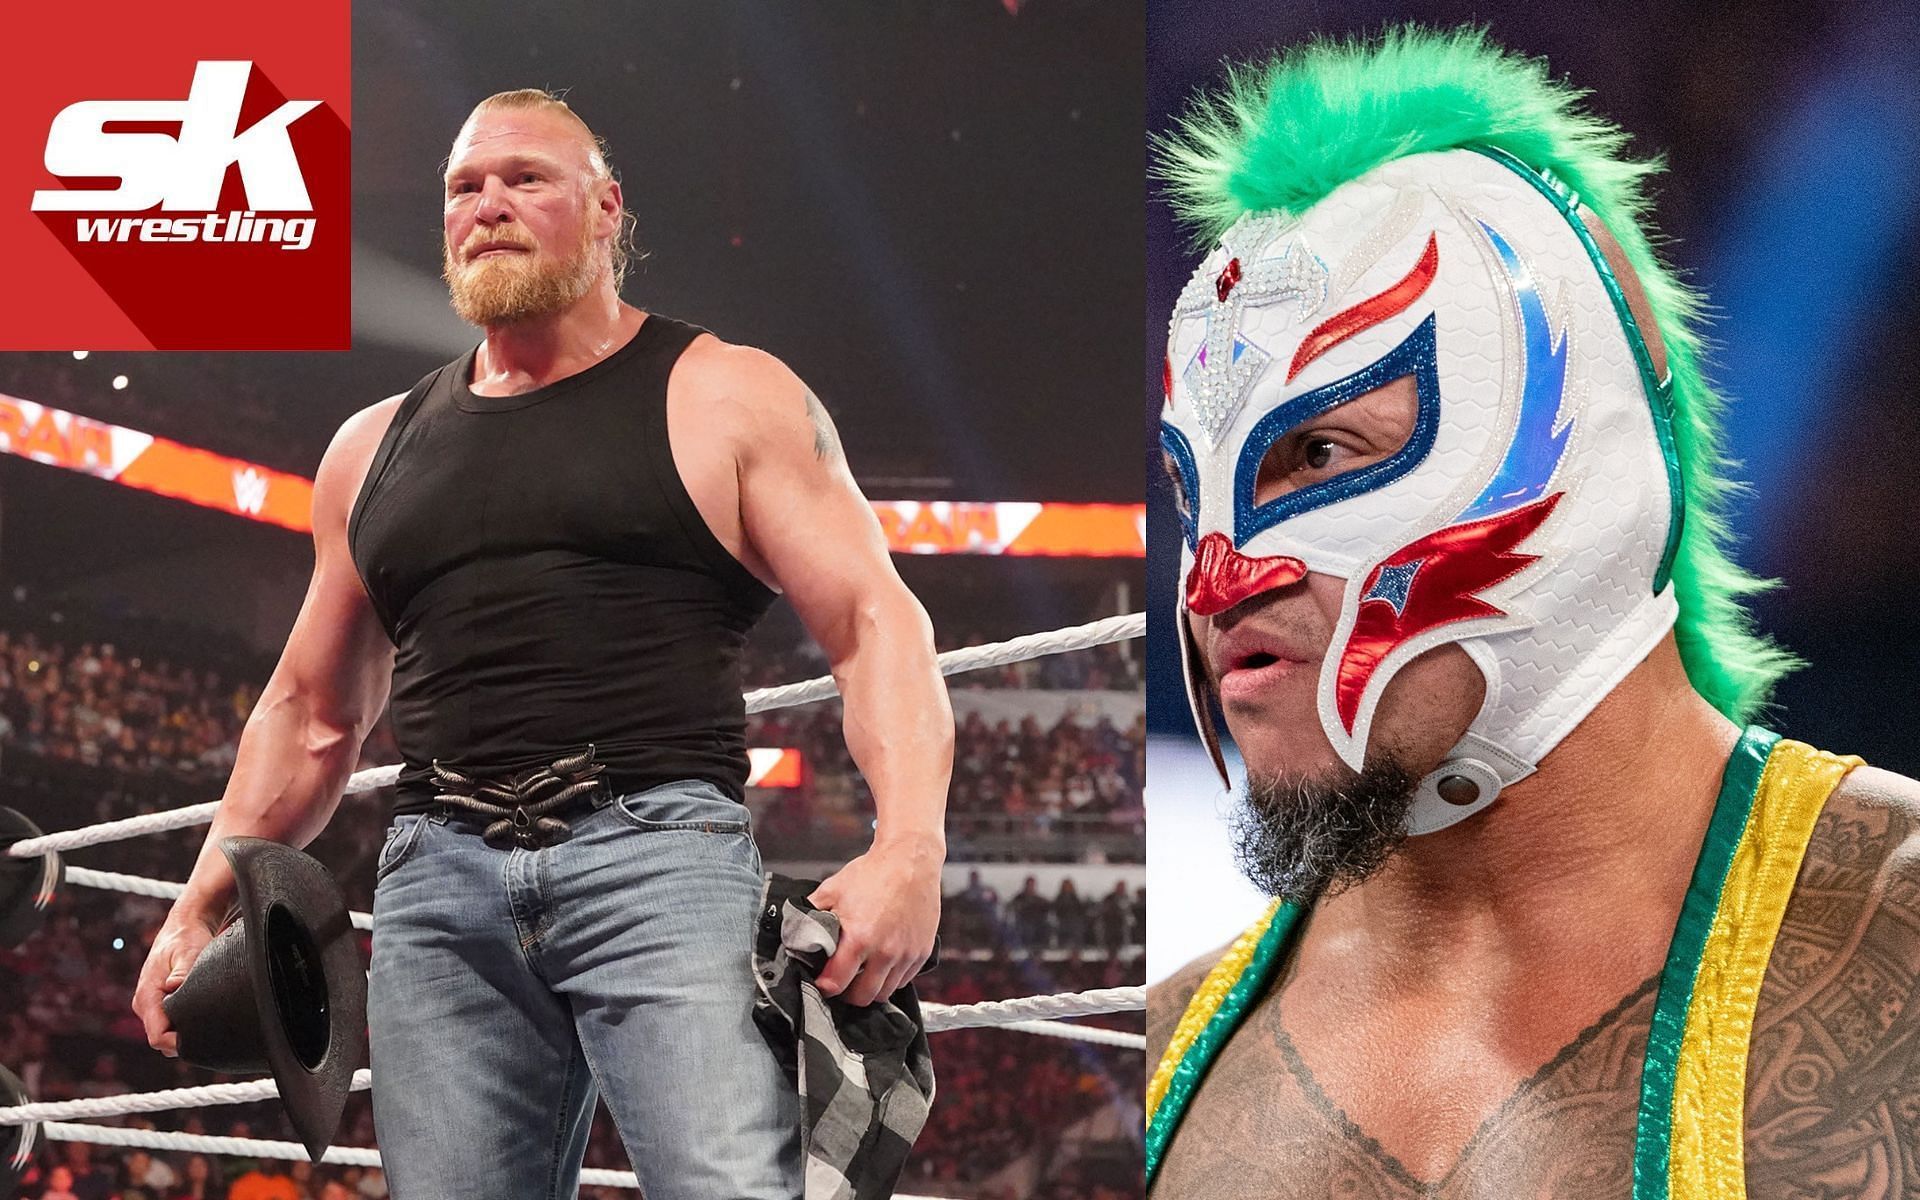 David and Goliath - Brock Lesnar and Rey Mysterio